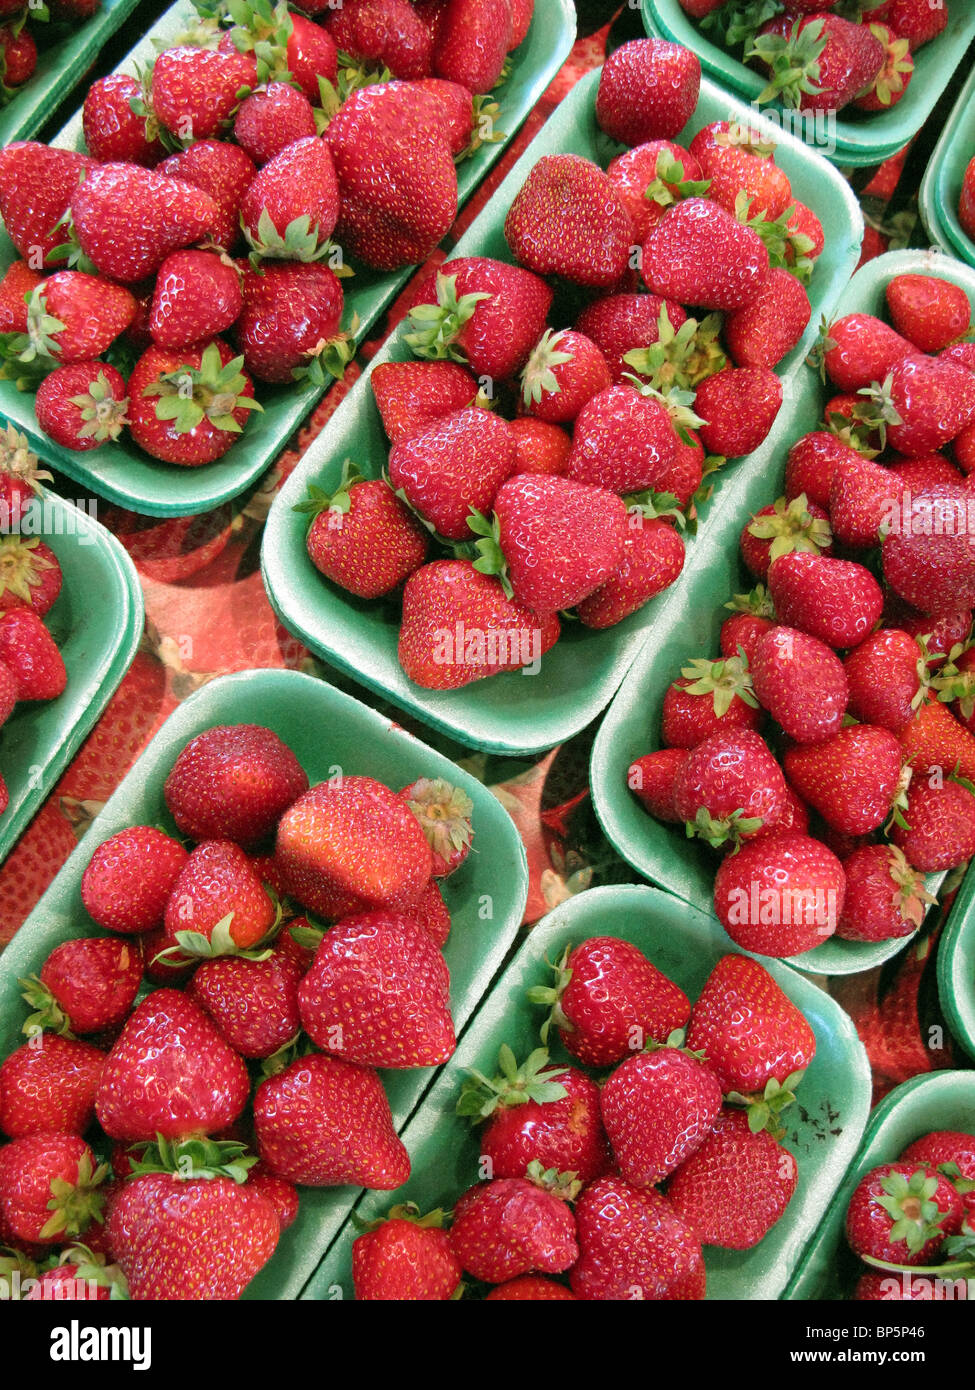 A collection of trays with fresh farmer's market red strawberries Stock Photo